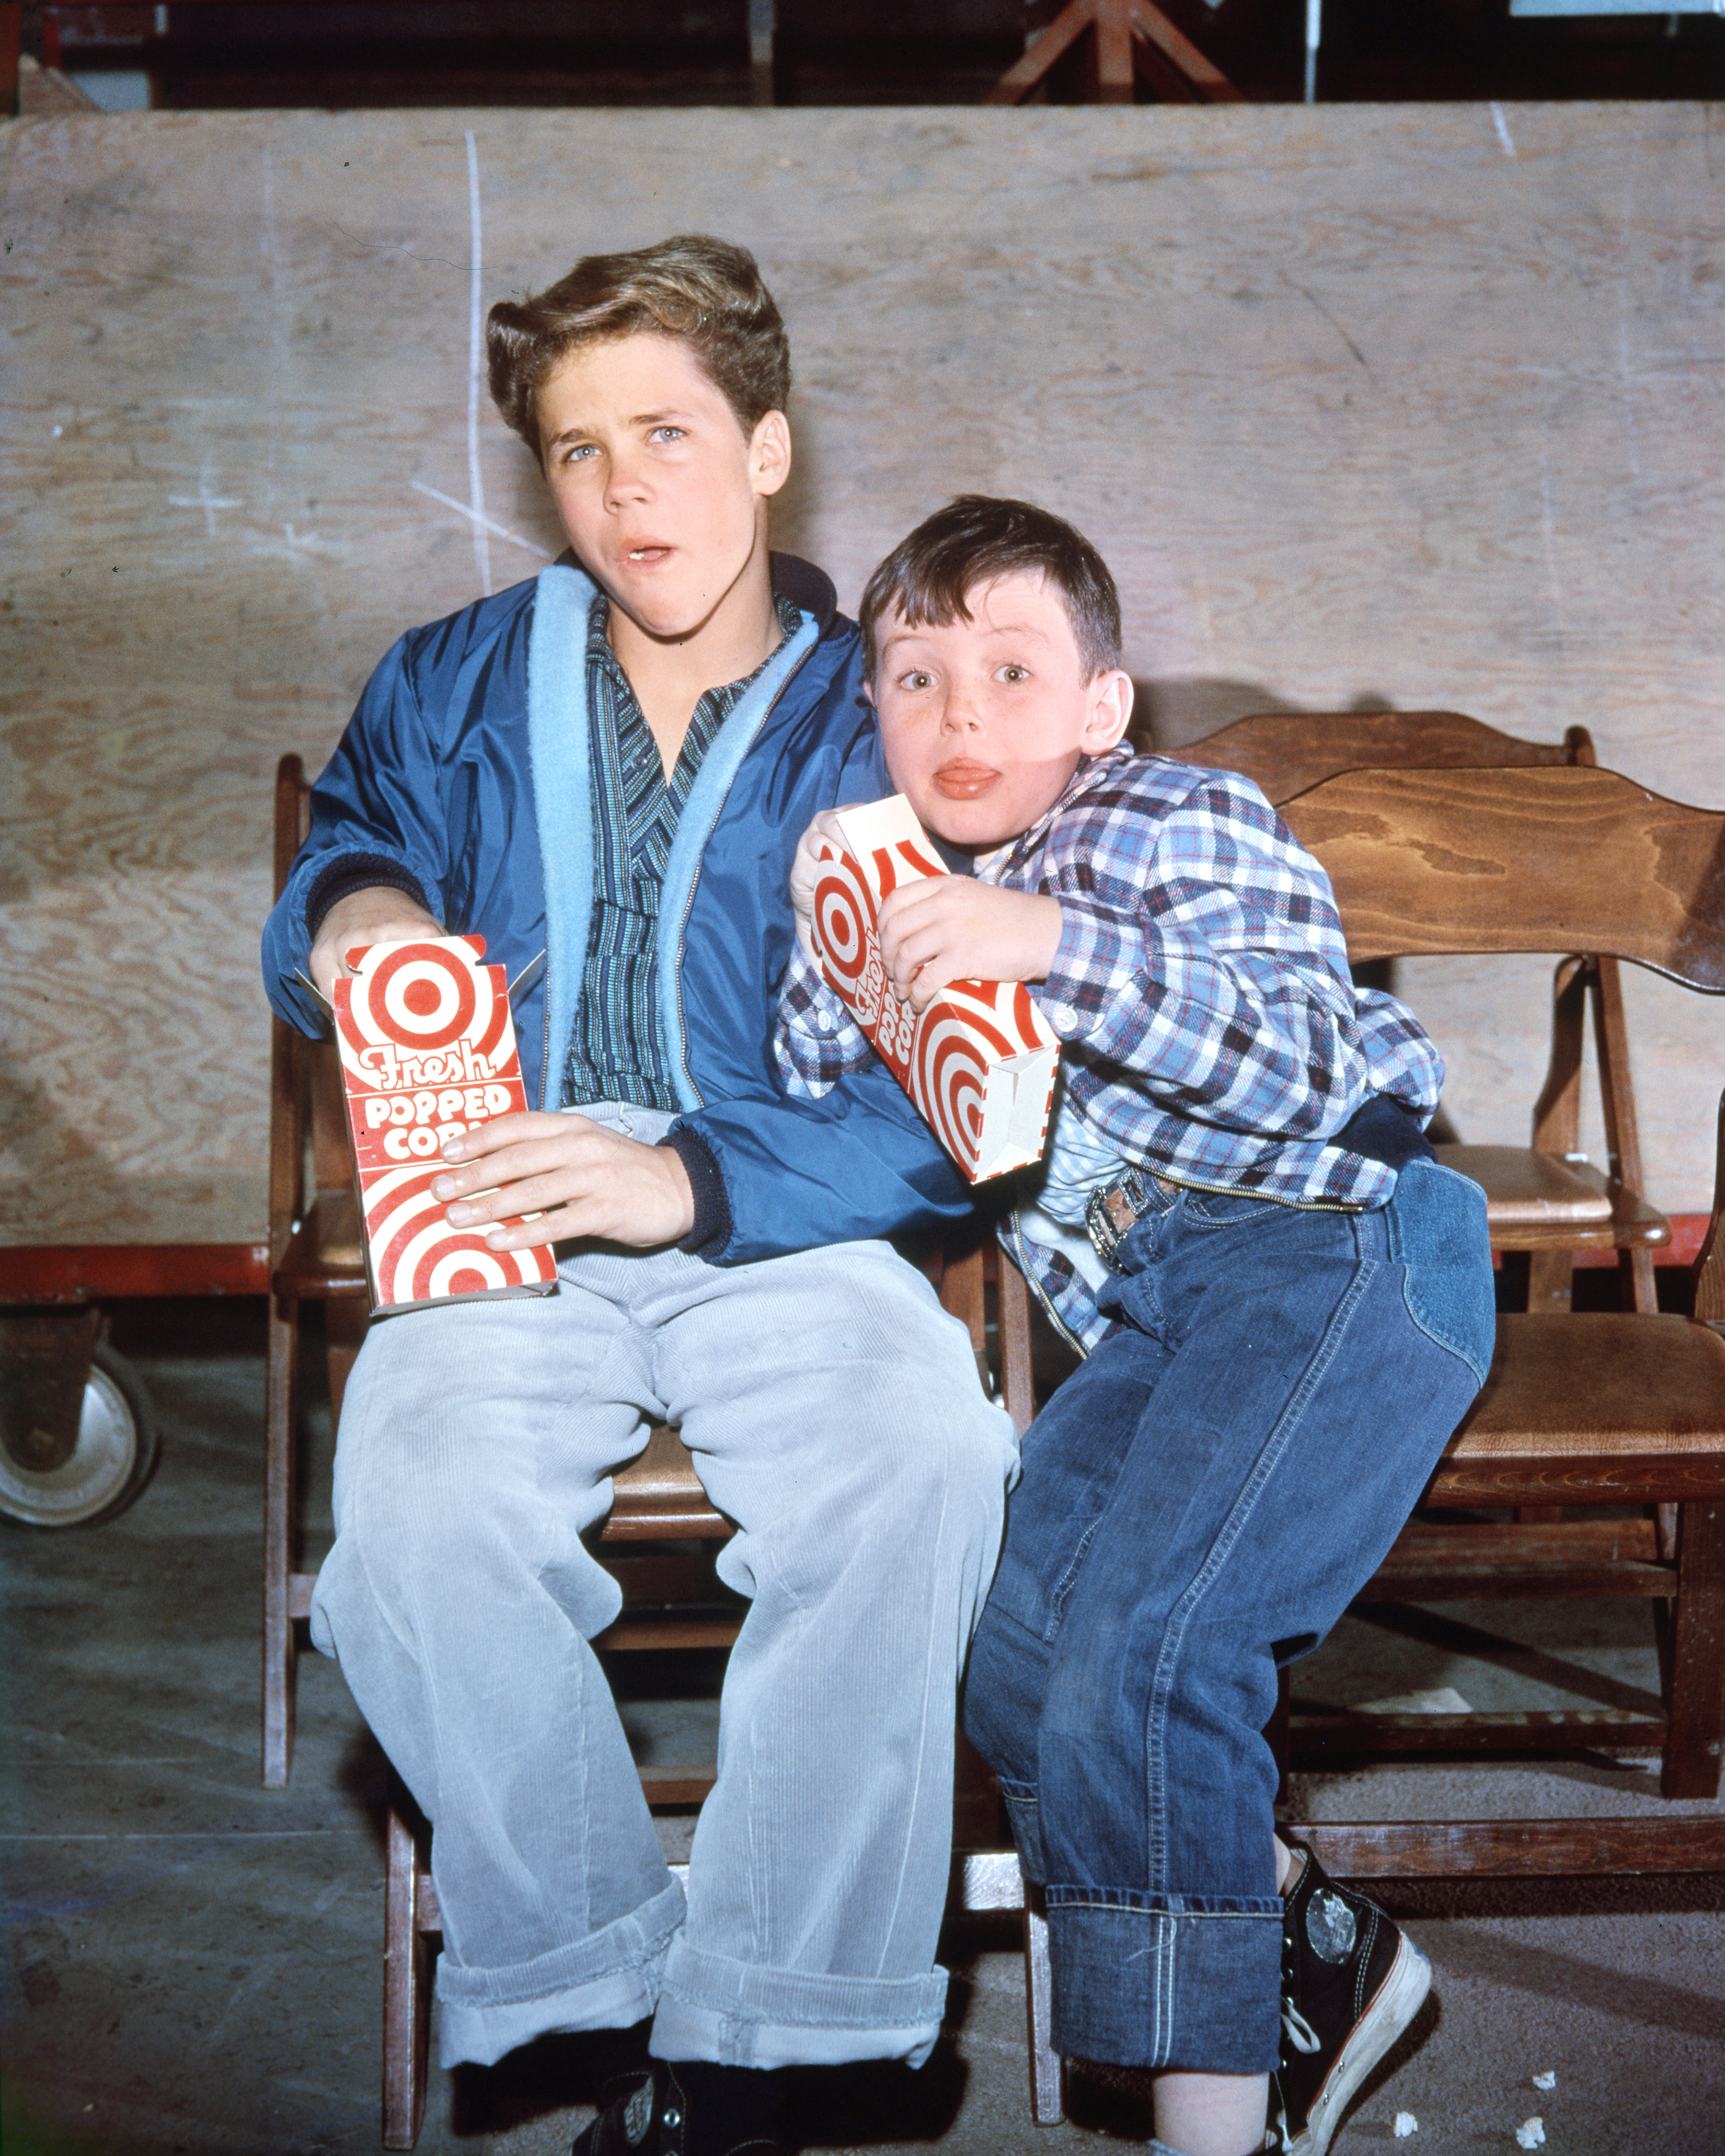 Tony Dow and Jerry Mathers in a promotional portrait for “Leave It to Beaver” in 1960. | Source: Getty Images